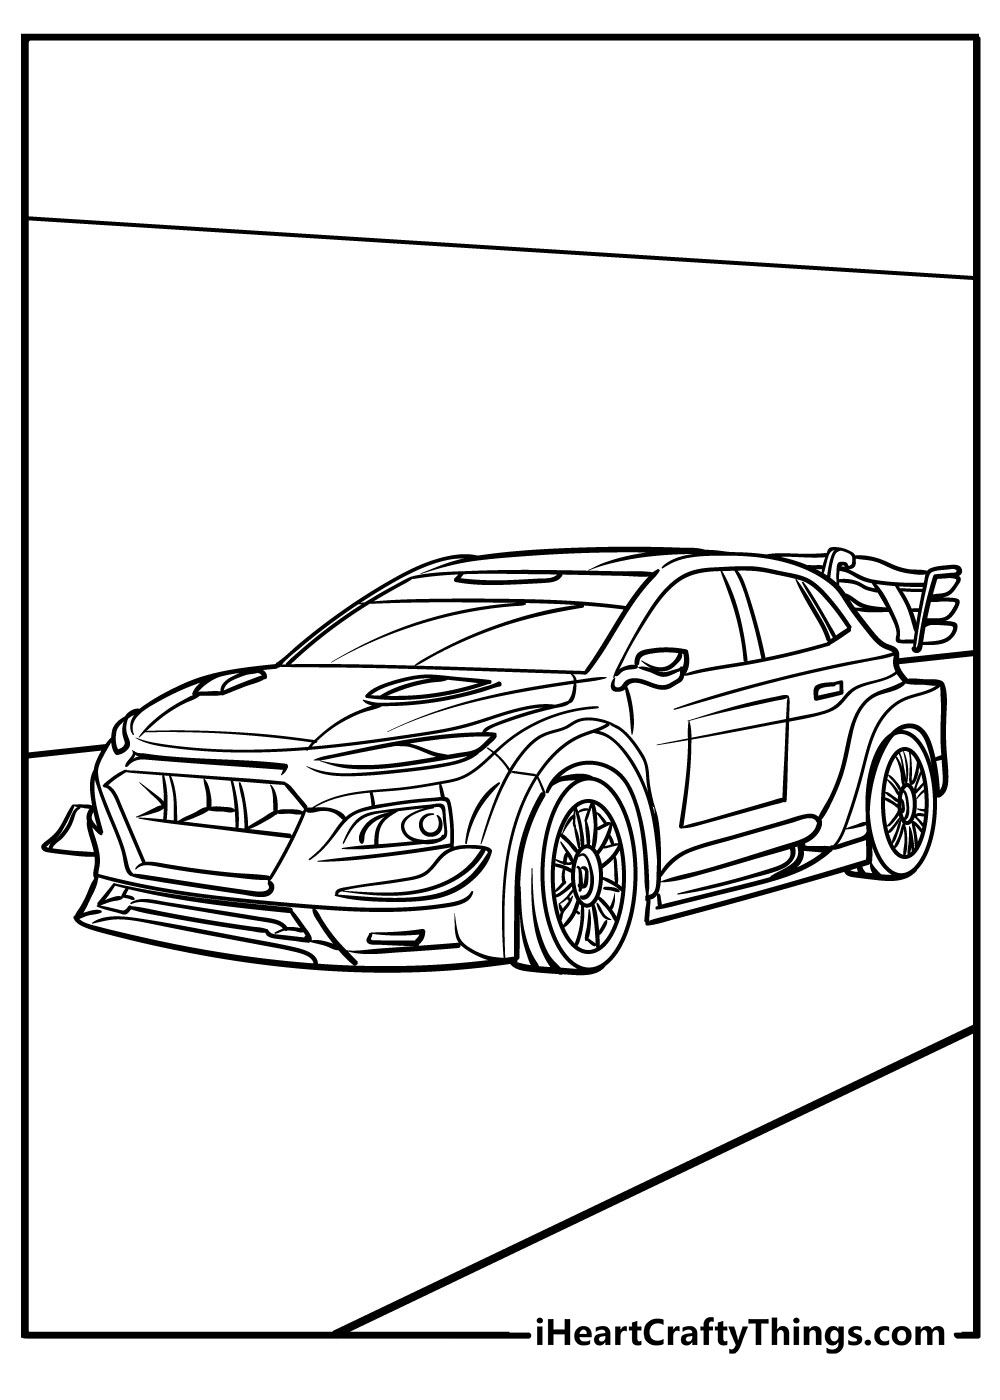 cool vehicles Coloring Pages free printable